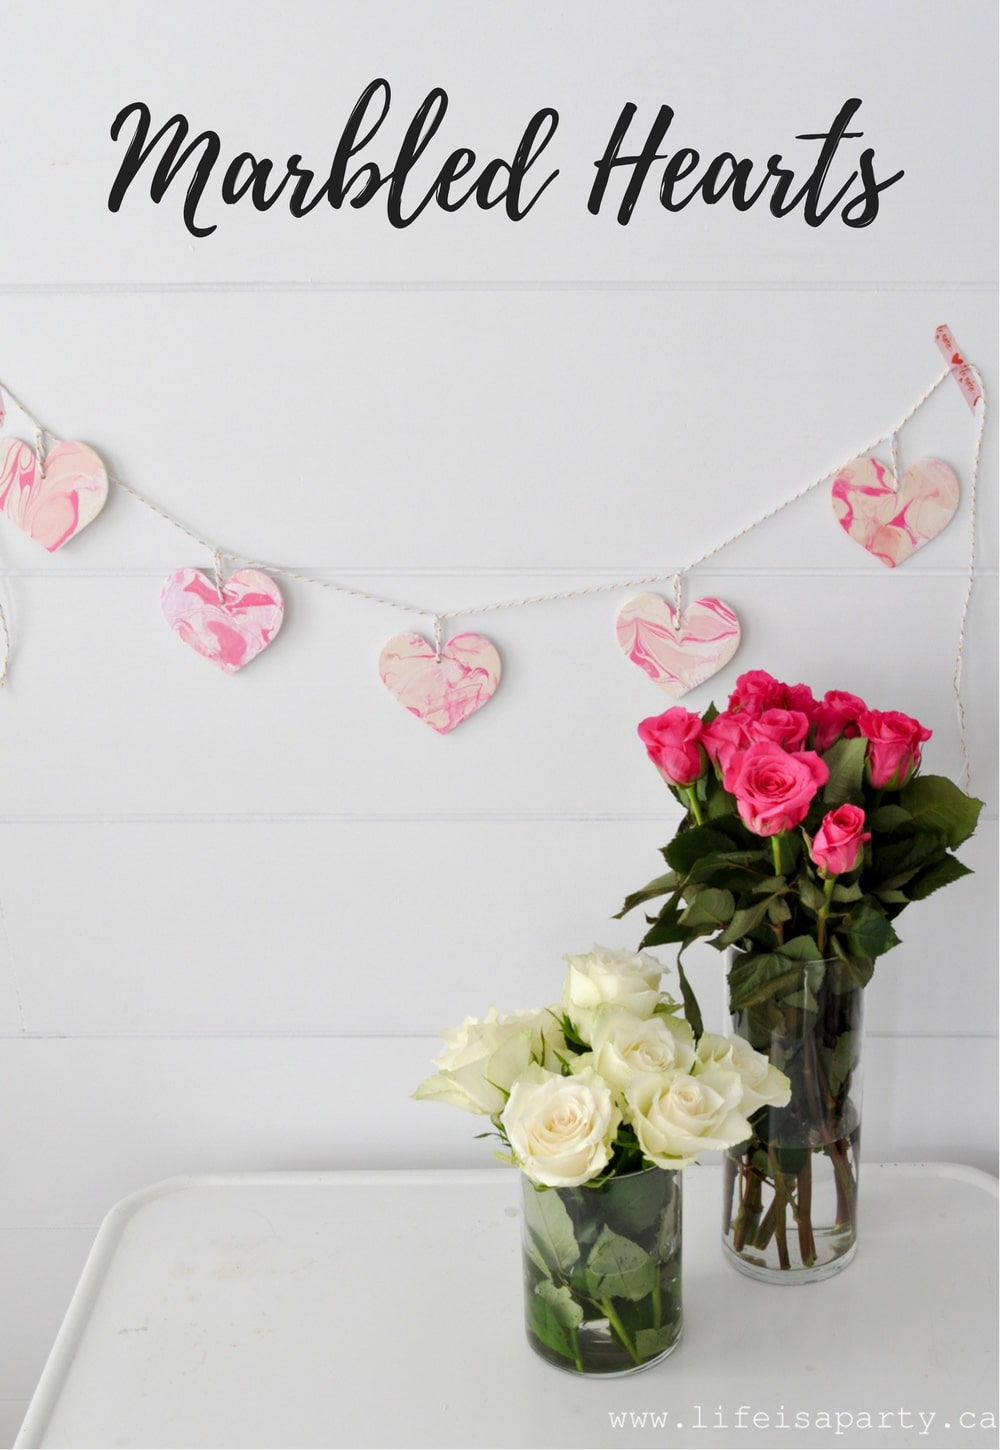 Nail Polish Marble Hearts Valentine's Day Craft: use nail polish to water marble wooden hearts for Valentine's Day in any colour combination you like!